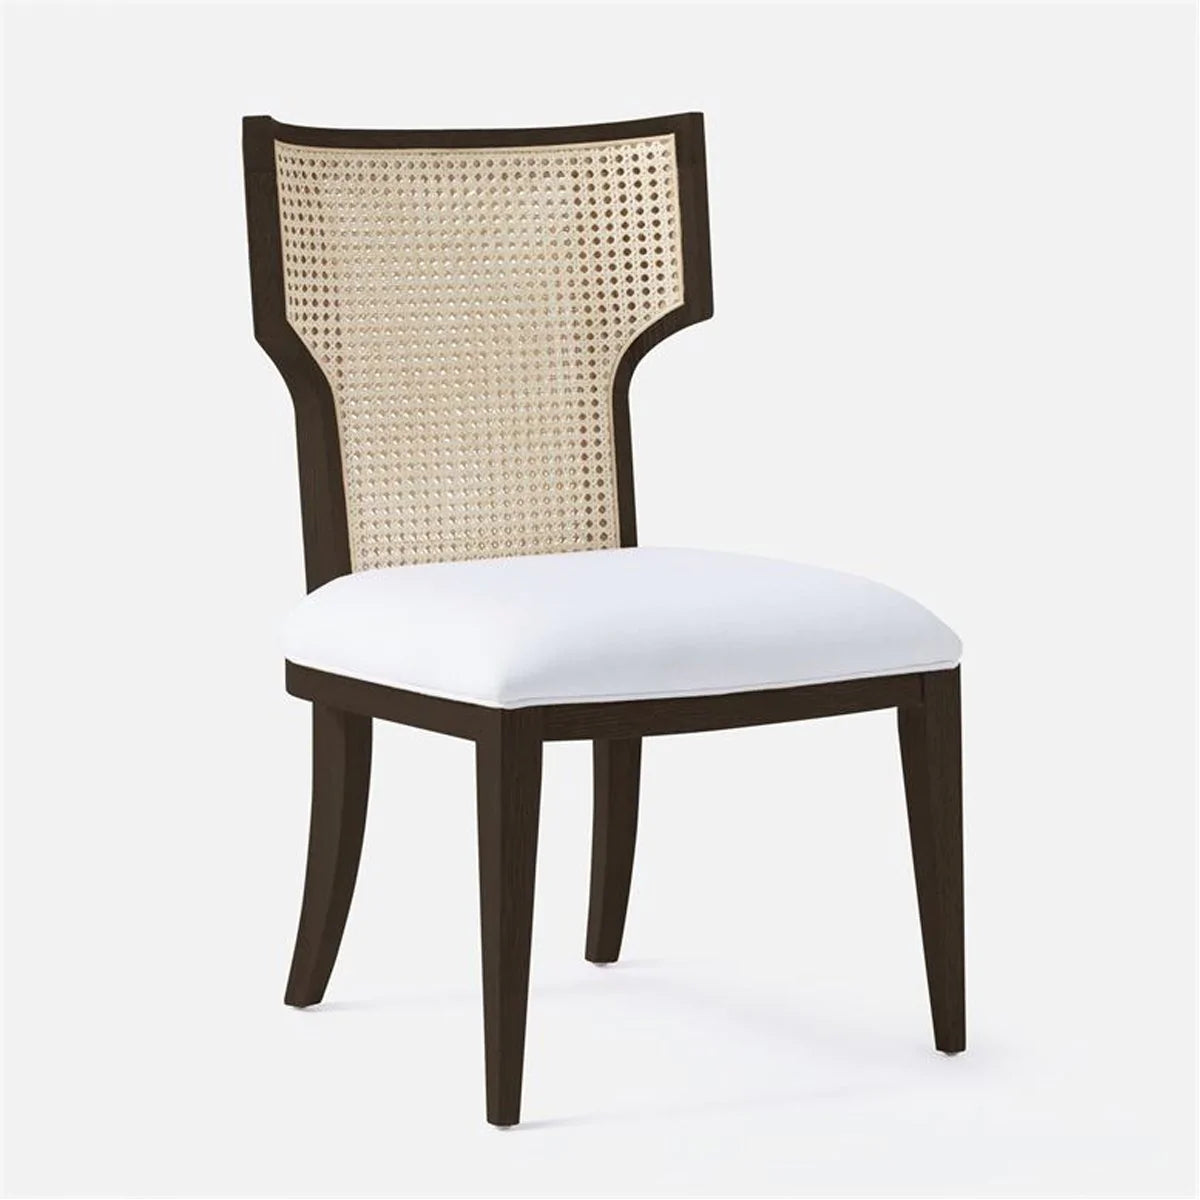 Made Goods Carleen Wingback Cane Dining Chair in Danube Fabric